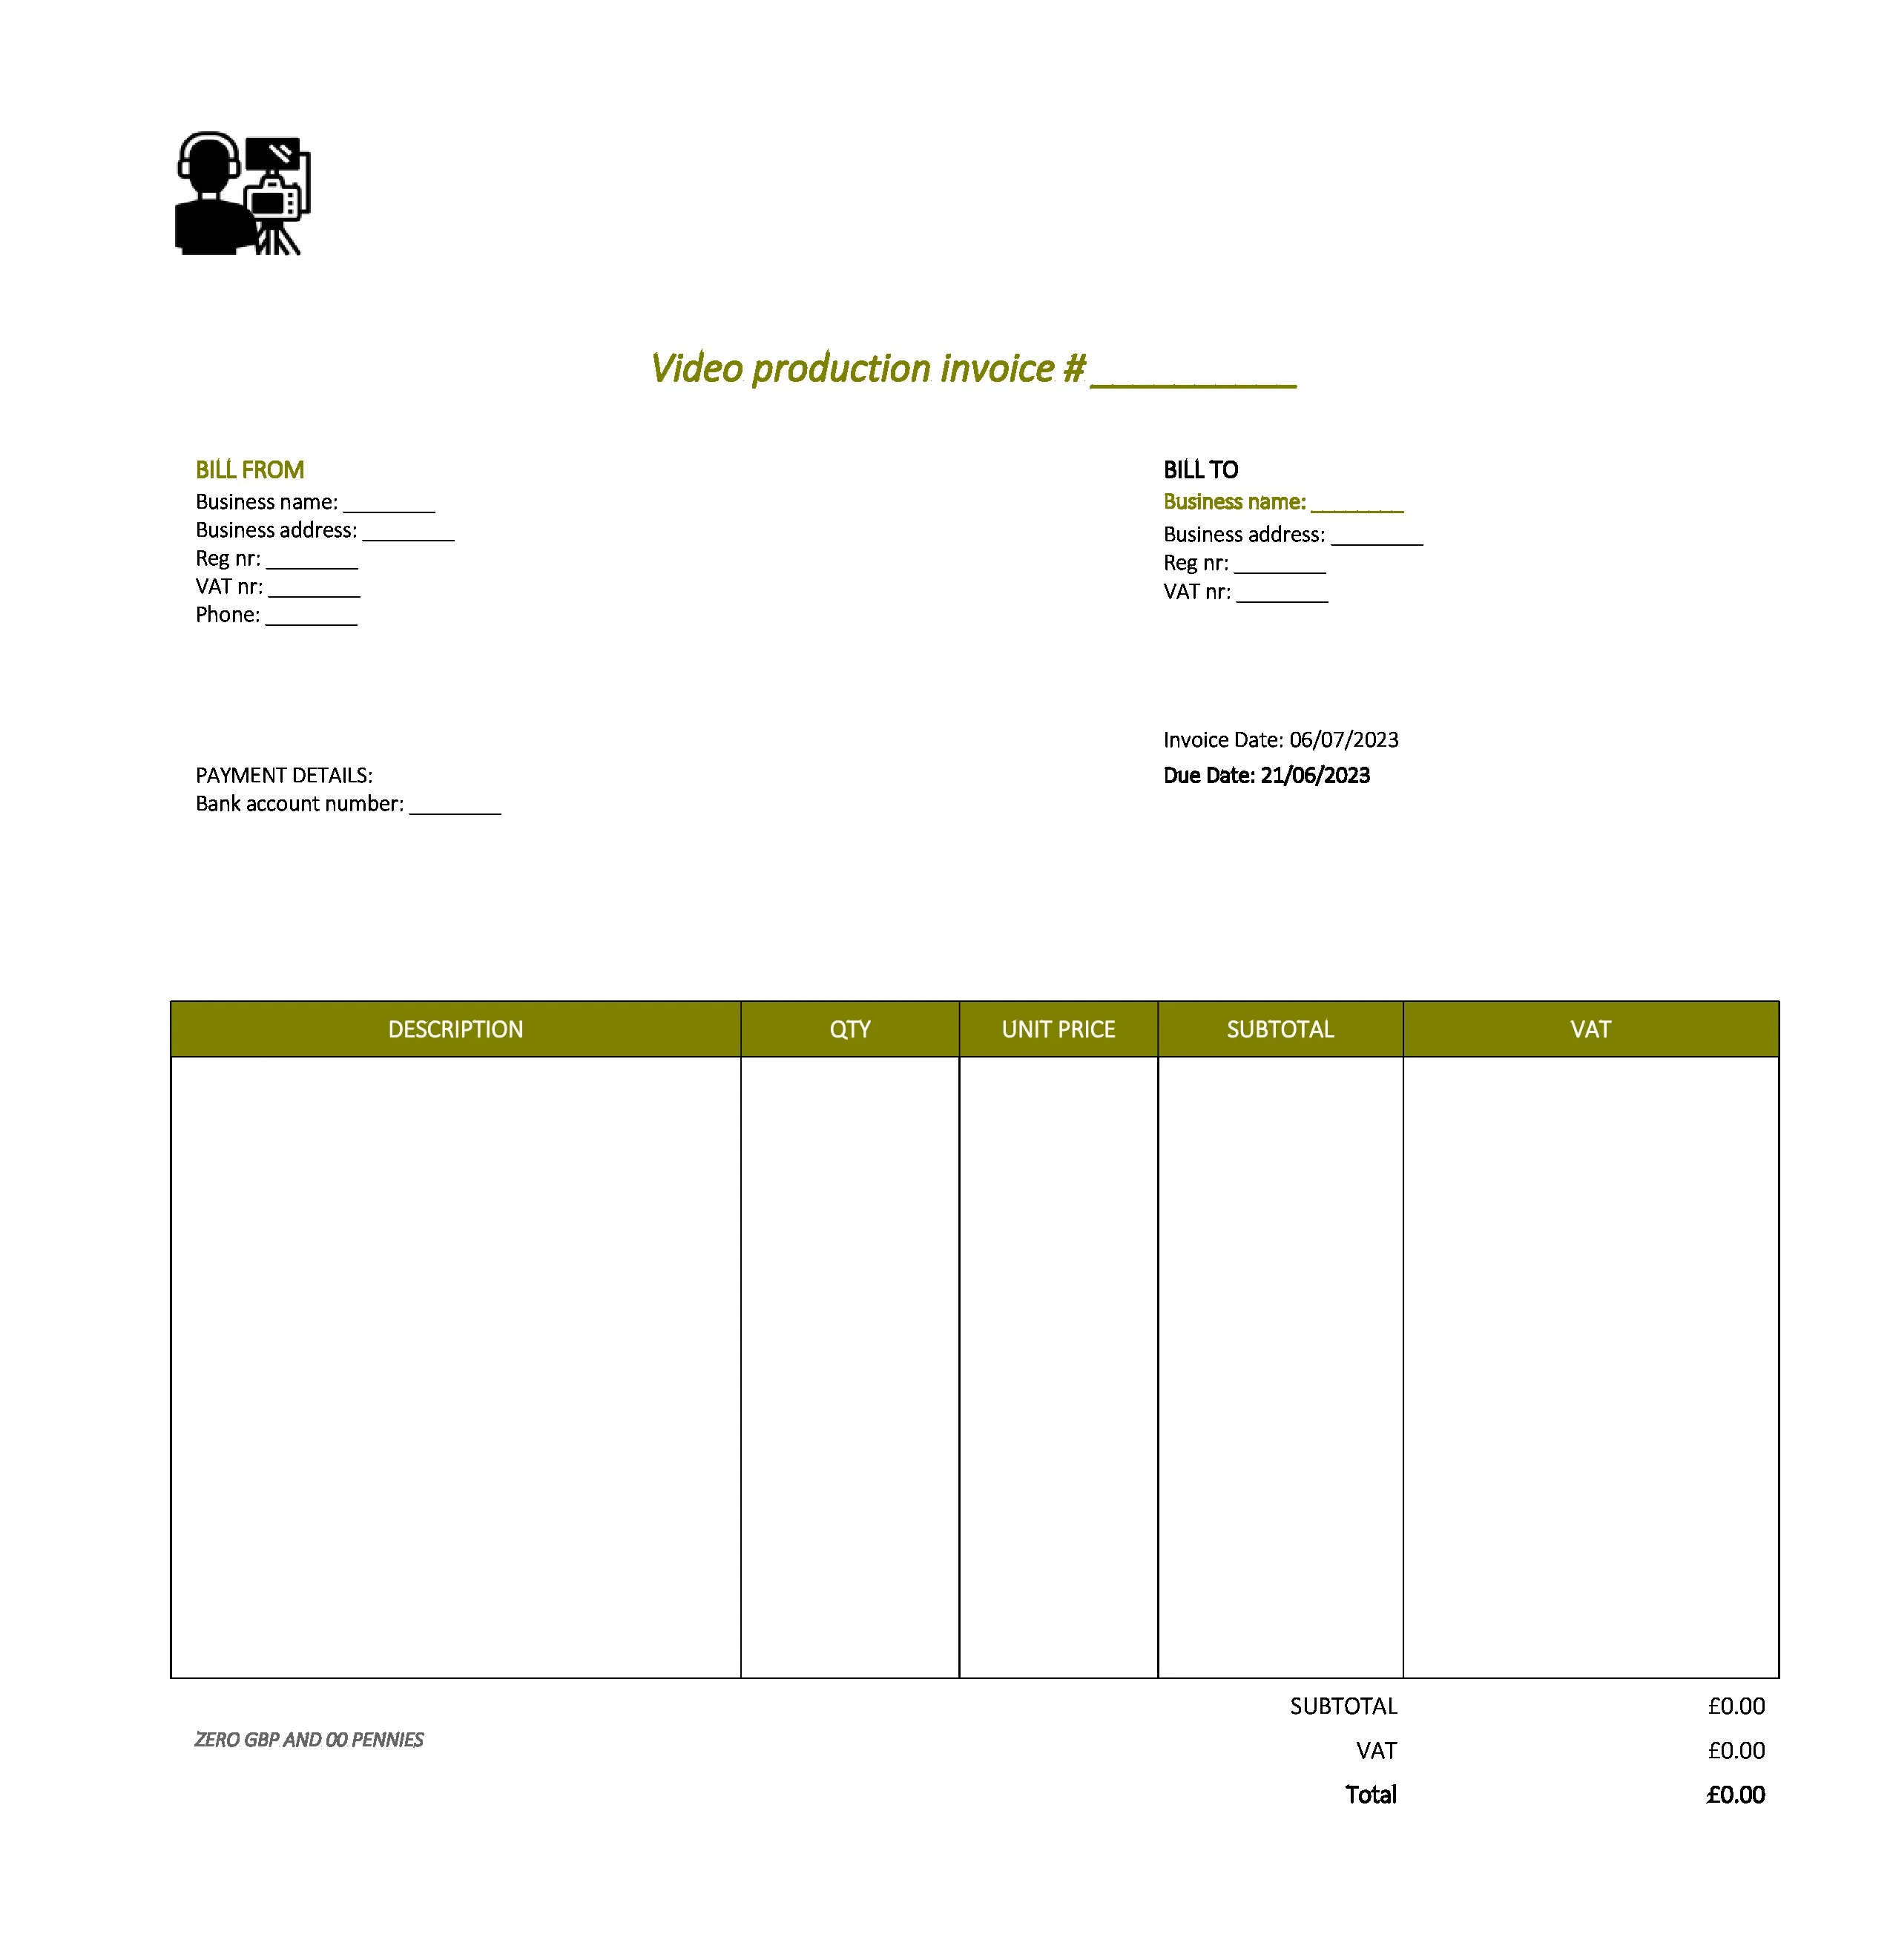 minimalist video production invoice template UK Excel / Google sheets